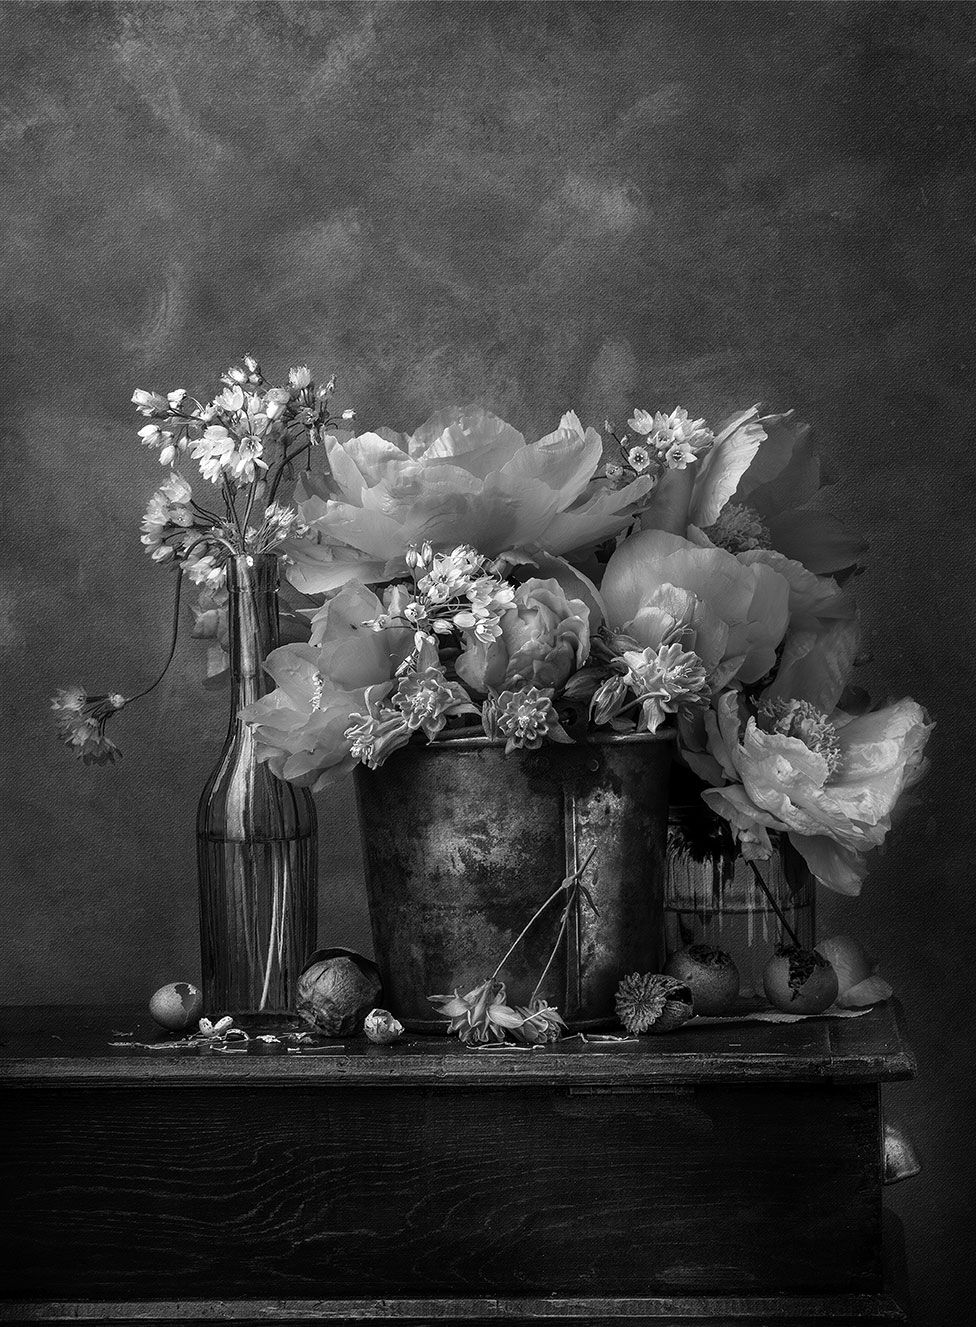 A photo of flowers in vases on a table